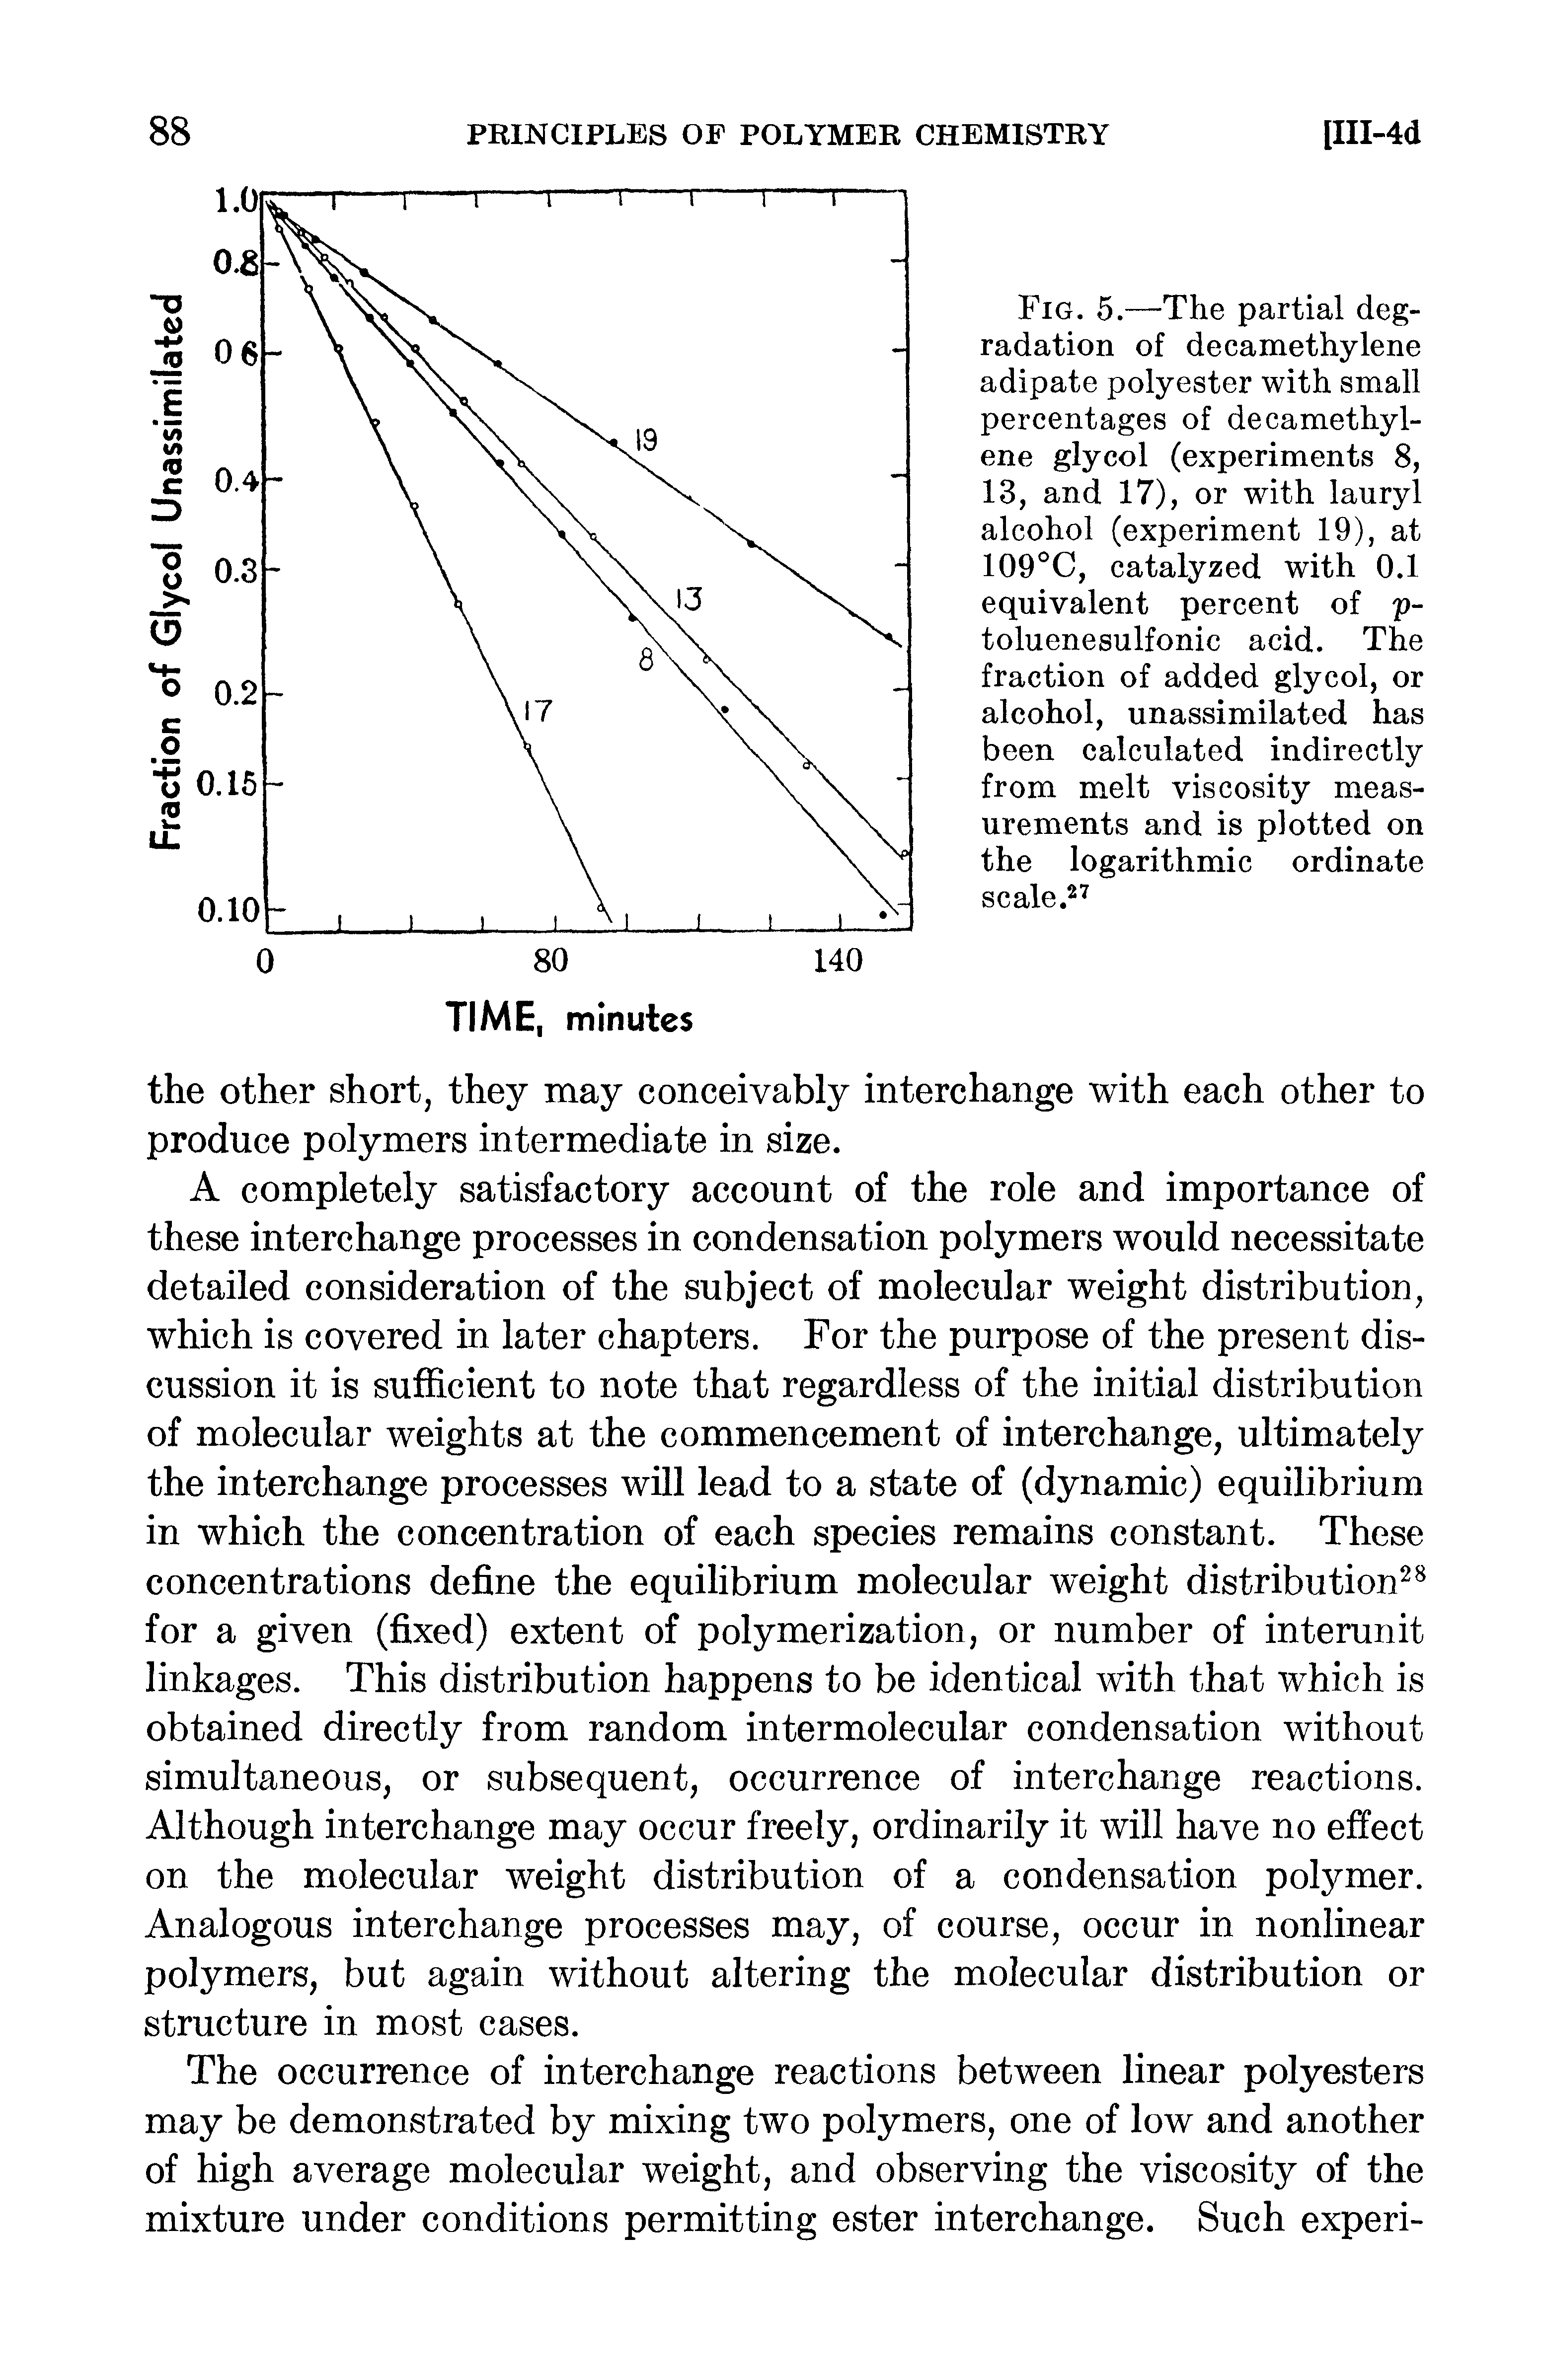 Fig. 5.—The partial degradation of decamethylene adipate polyester with small percentages of decamethylene glycol (experiments 8, 13, and 17), or with lauryl alcohol (experiment 19), at 109°C, catalyzed with 0.1 equivalent percent of p-toluenesulfonic acid. The fraction of added glycol, or alcohol, unassimilated has been calculated indirectly from melt viscosity measurements and is plotted on the logarithmic ordinate scale.2 ...